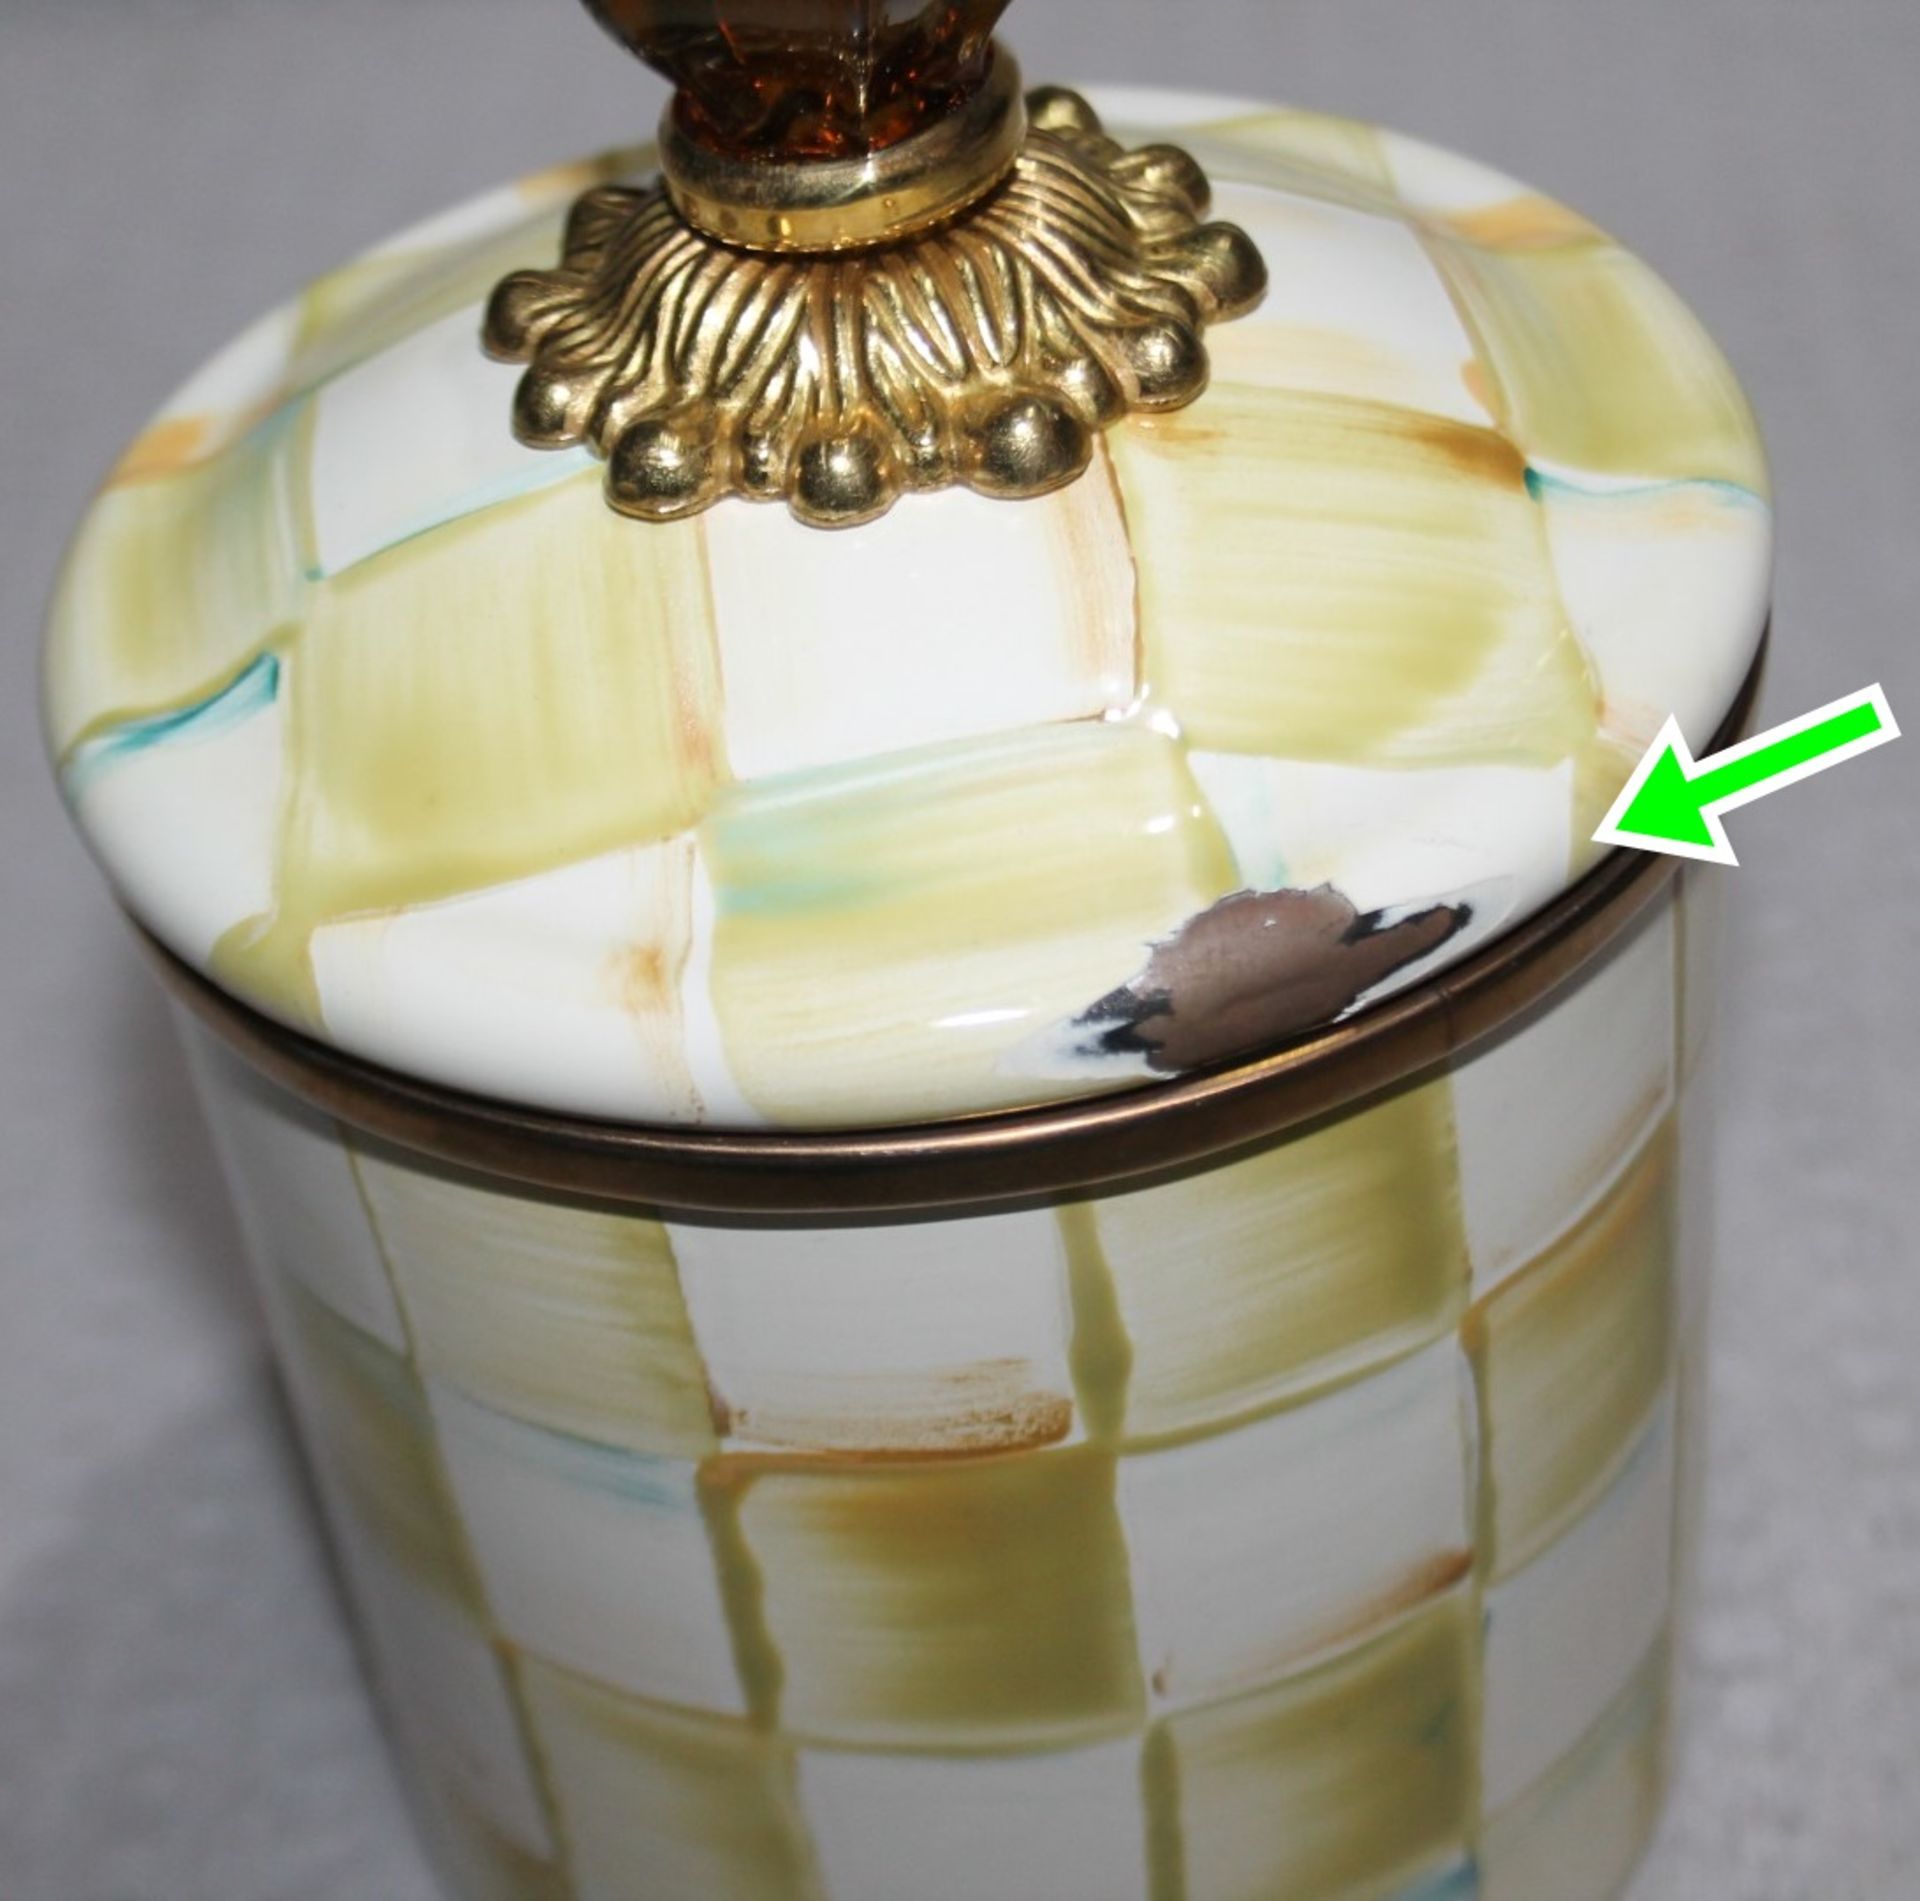 1 x MACKENZIE-CHILDS Small Parchment Check Enamel Canister - Original Price £97.00 - Ref: HAR280/ - Image 6 of 9